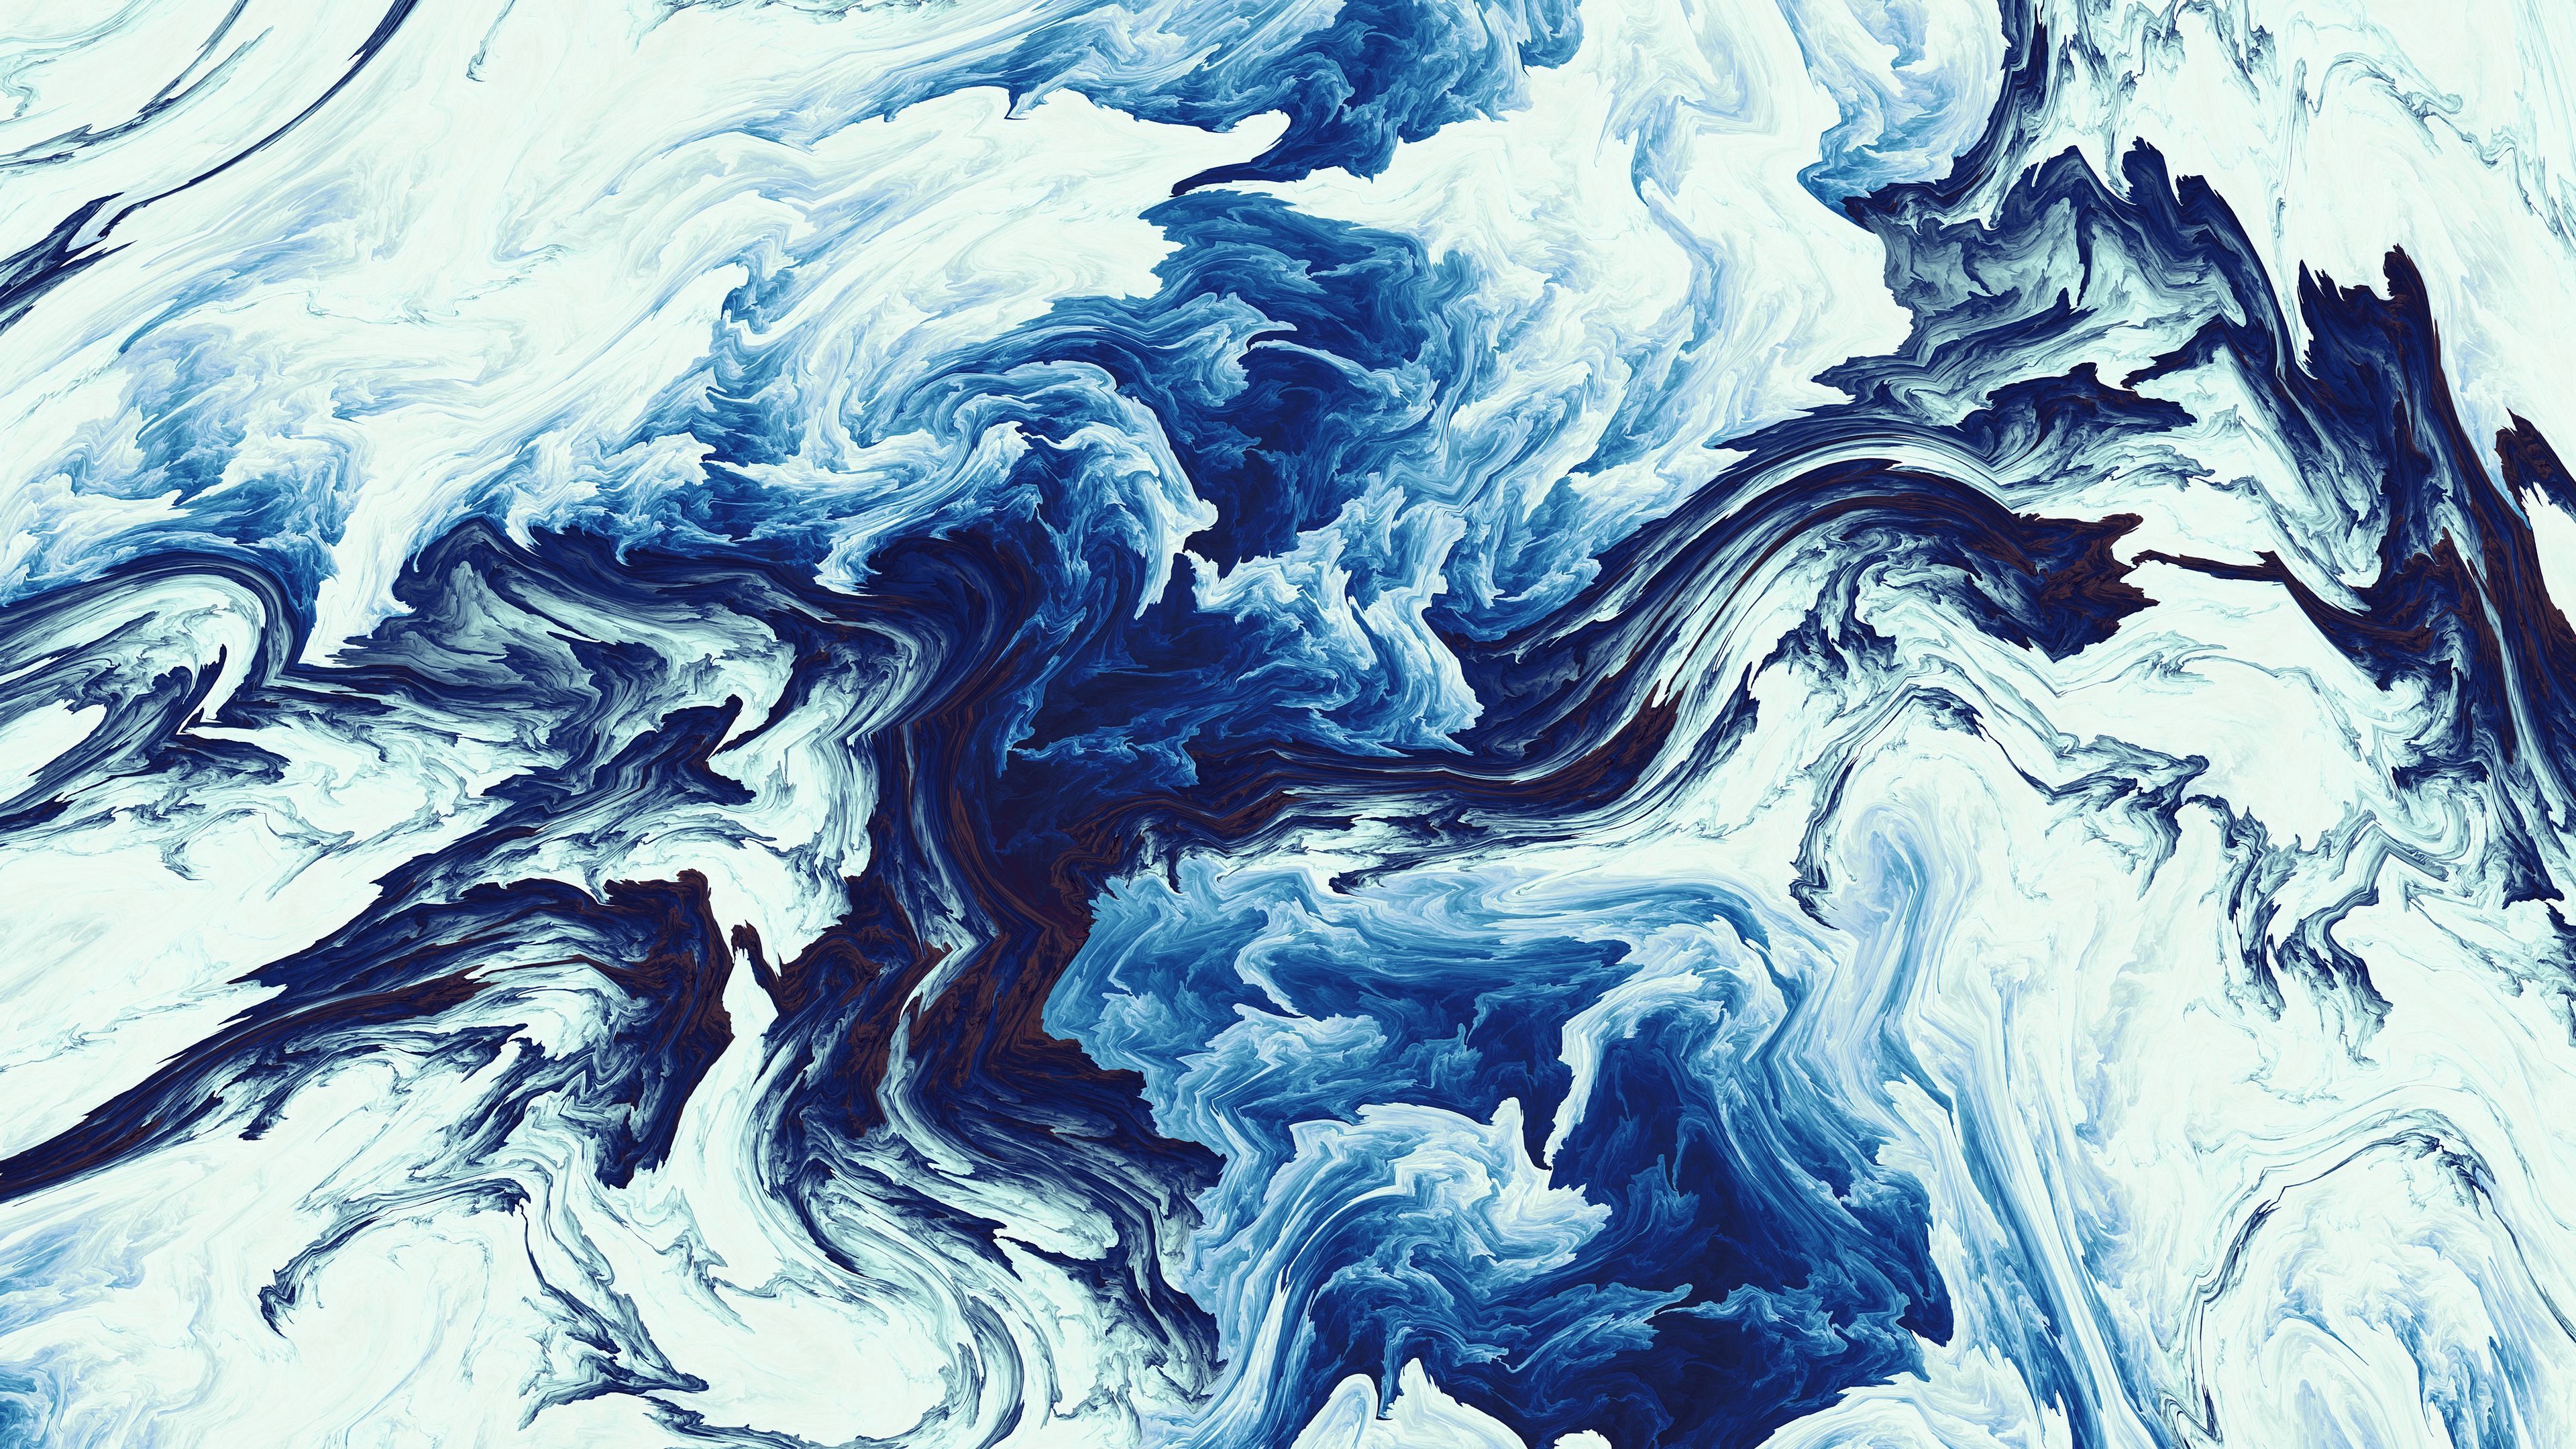 Download wallpaper 3840x2160 stains, blending, abstraction, blue, white, shades 4k uhd 16:9 HD background